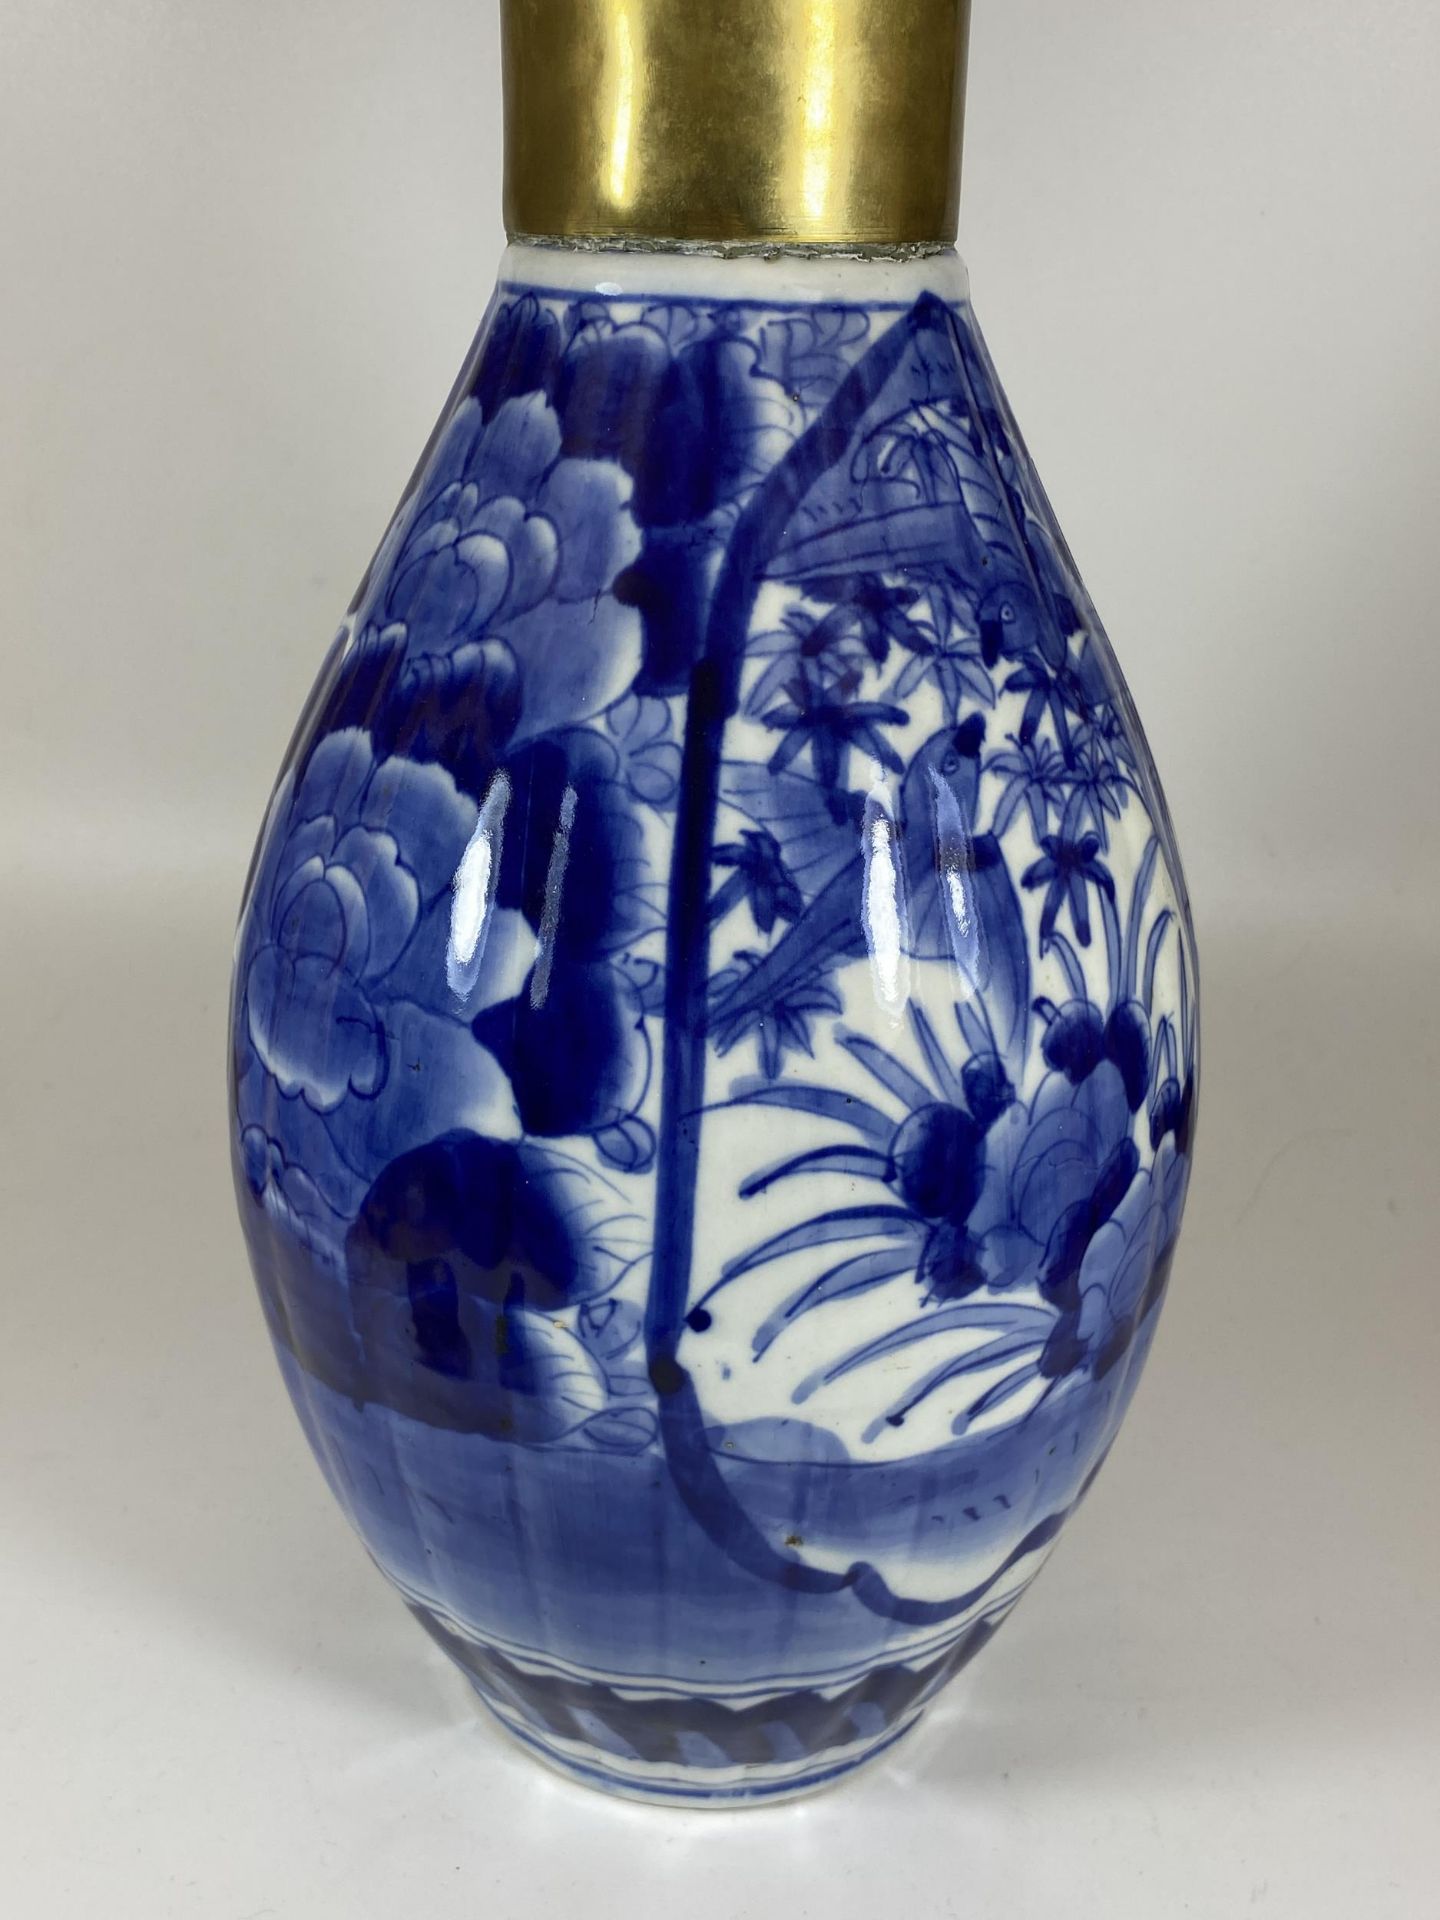 A LARGE JAPANESE MEIJI PERIOD (1868-1912) BLUE AND WHITE FLORAL DESIGN VASE WITH CONVERTED TRENCH - Image 3 of 6